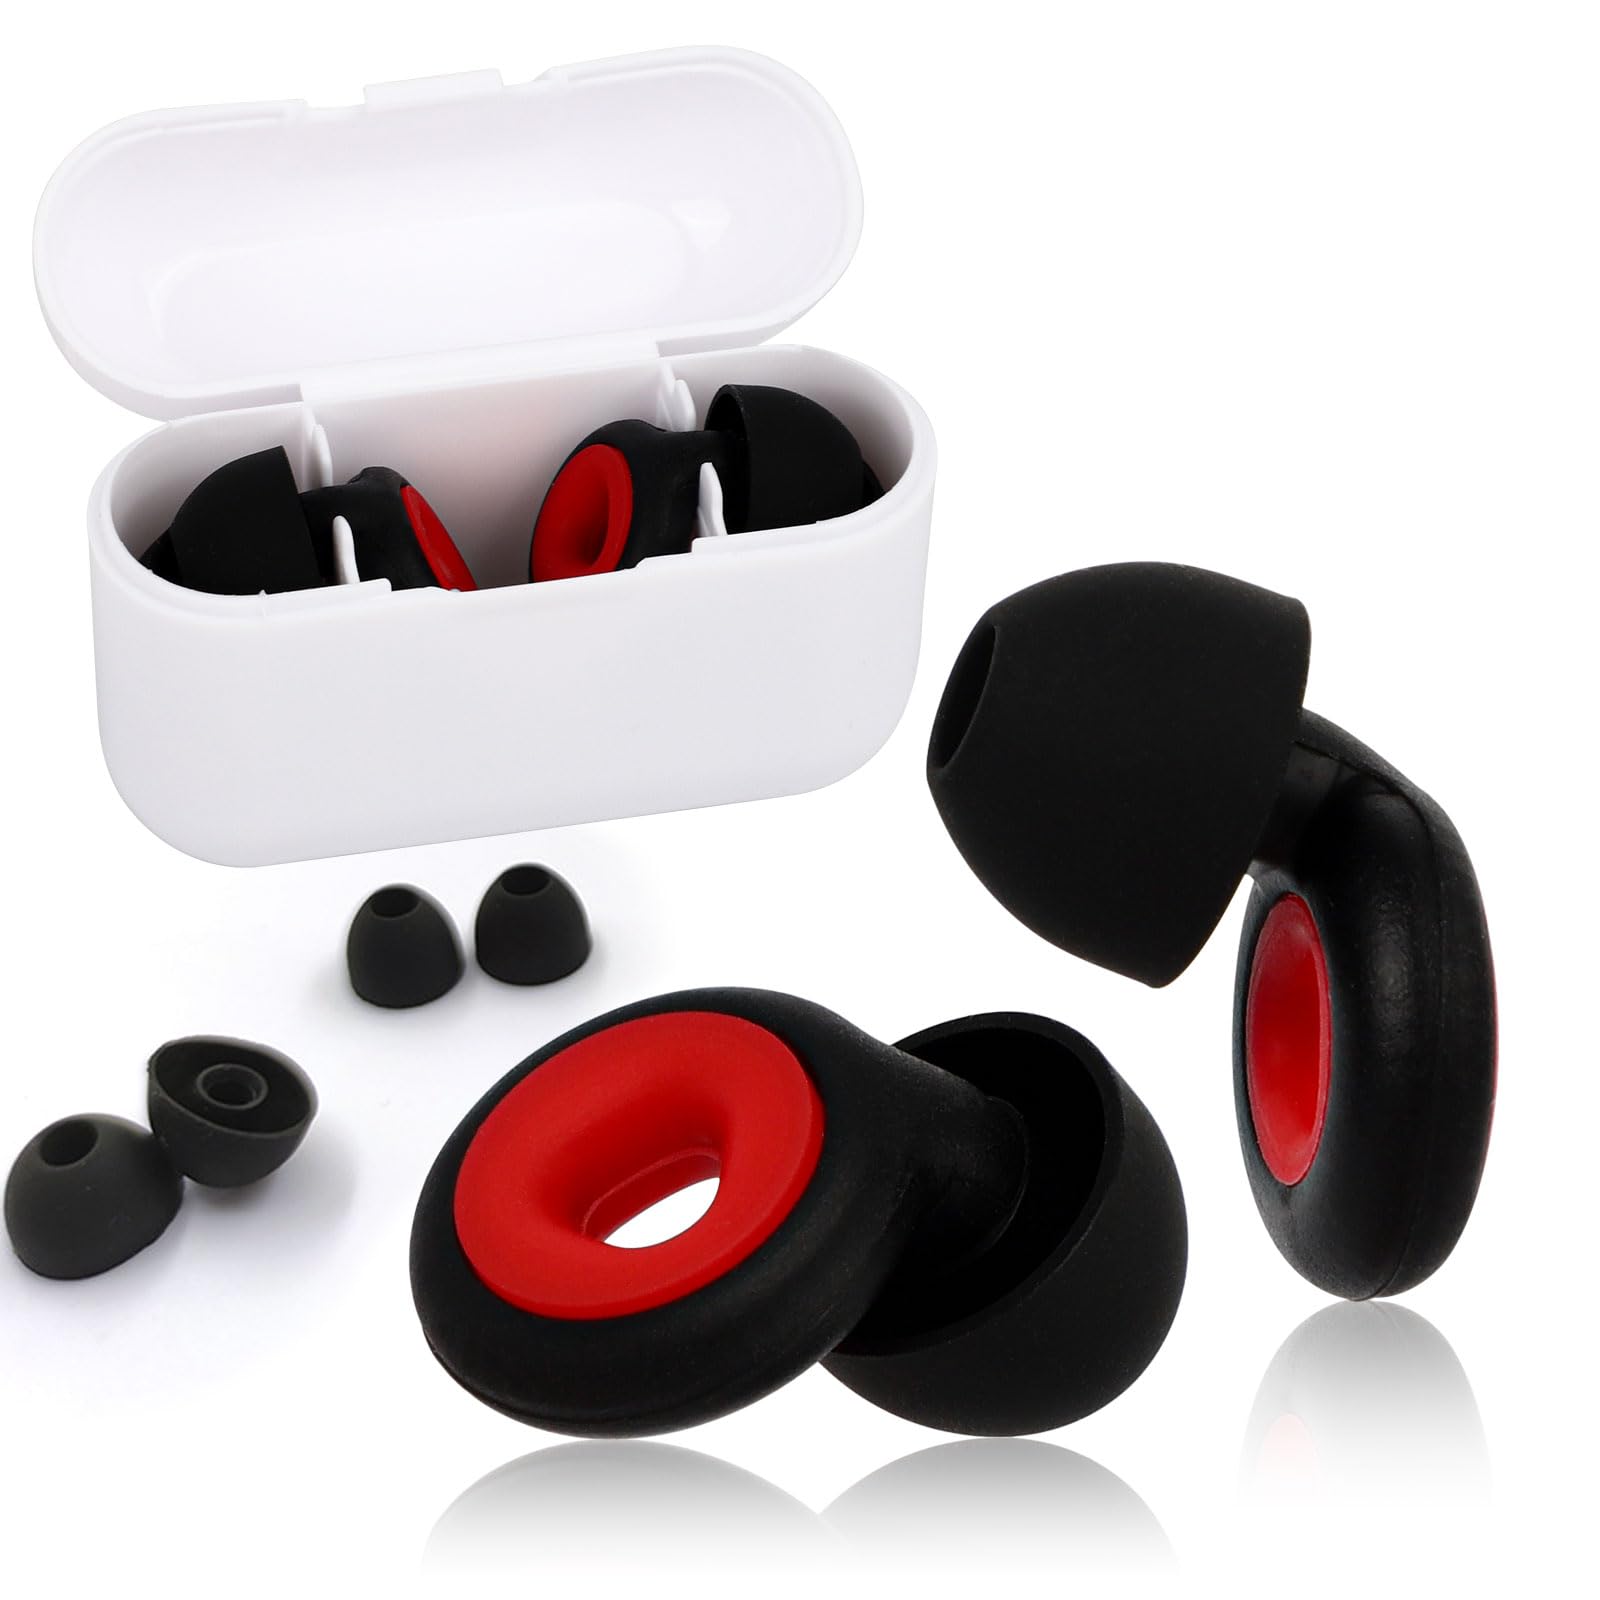 Ear Plugs Noise Cancelling Ear Plugs for Sleeping Swimming Studying Working  Concert Ear Plugs with 3-Layer Noise Reduction (Black+White)